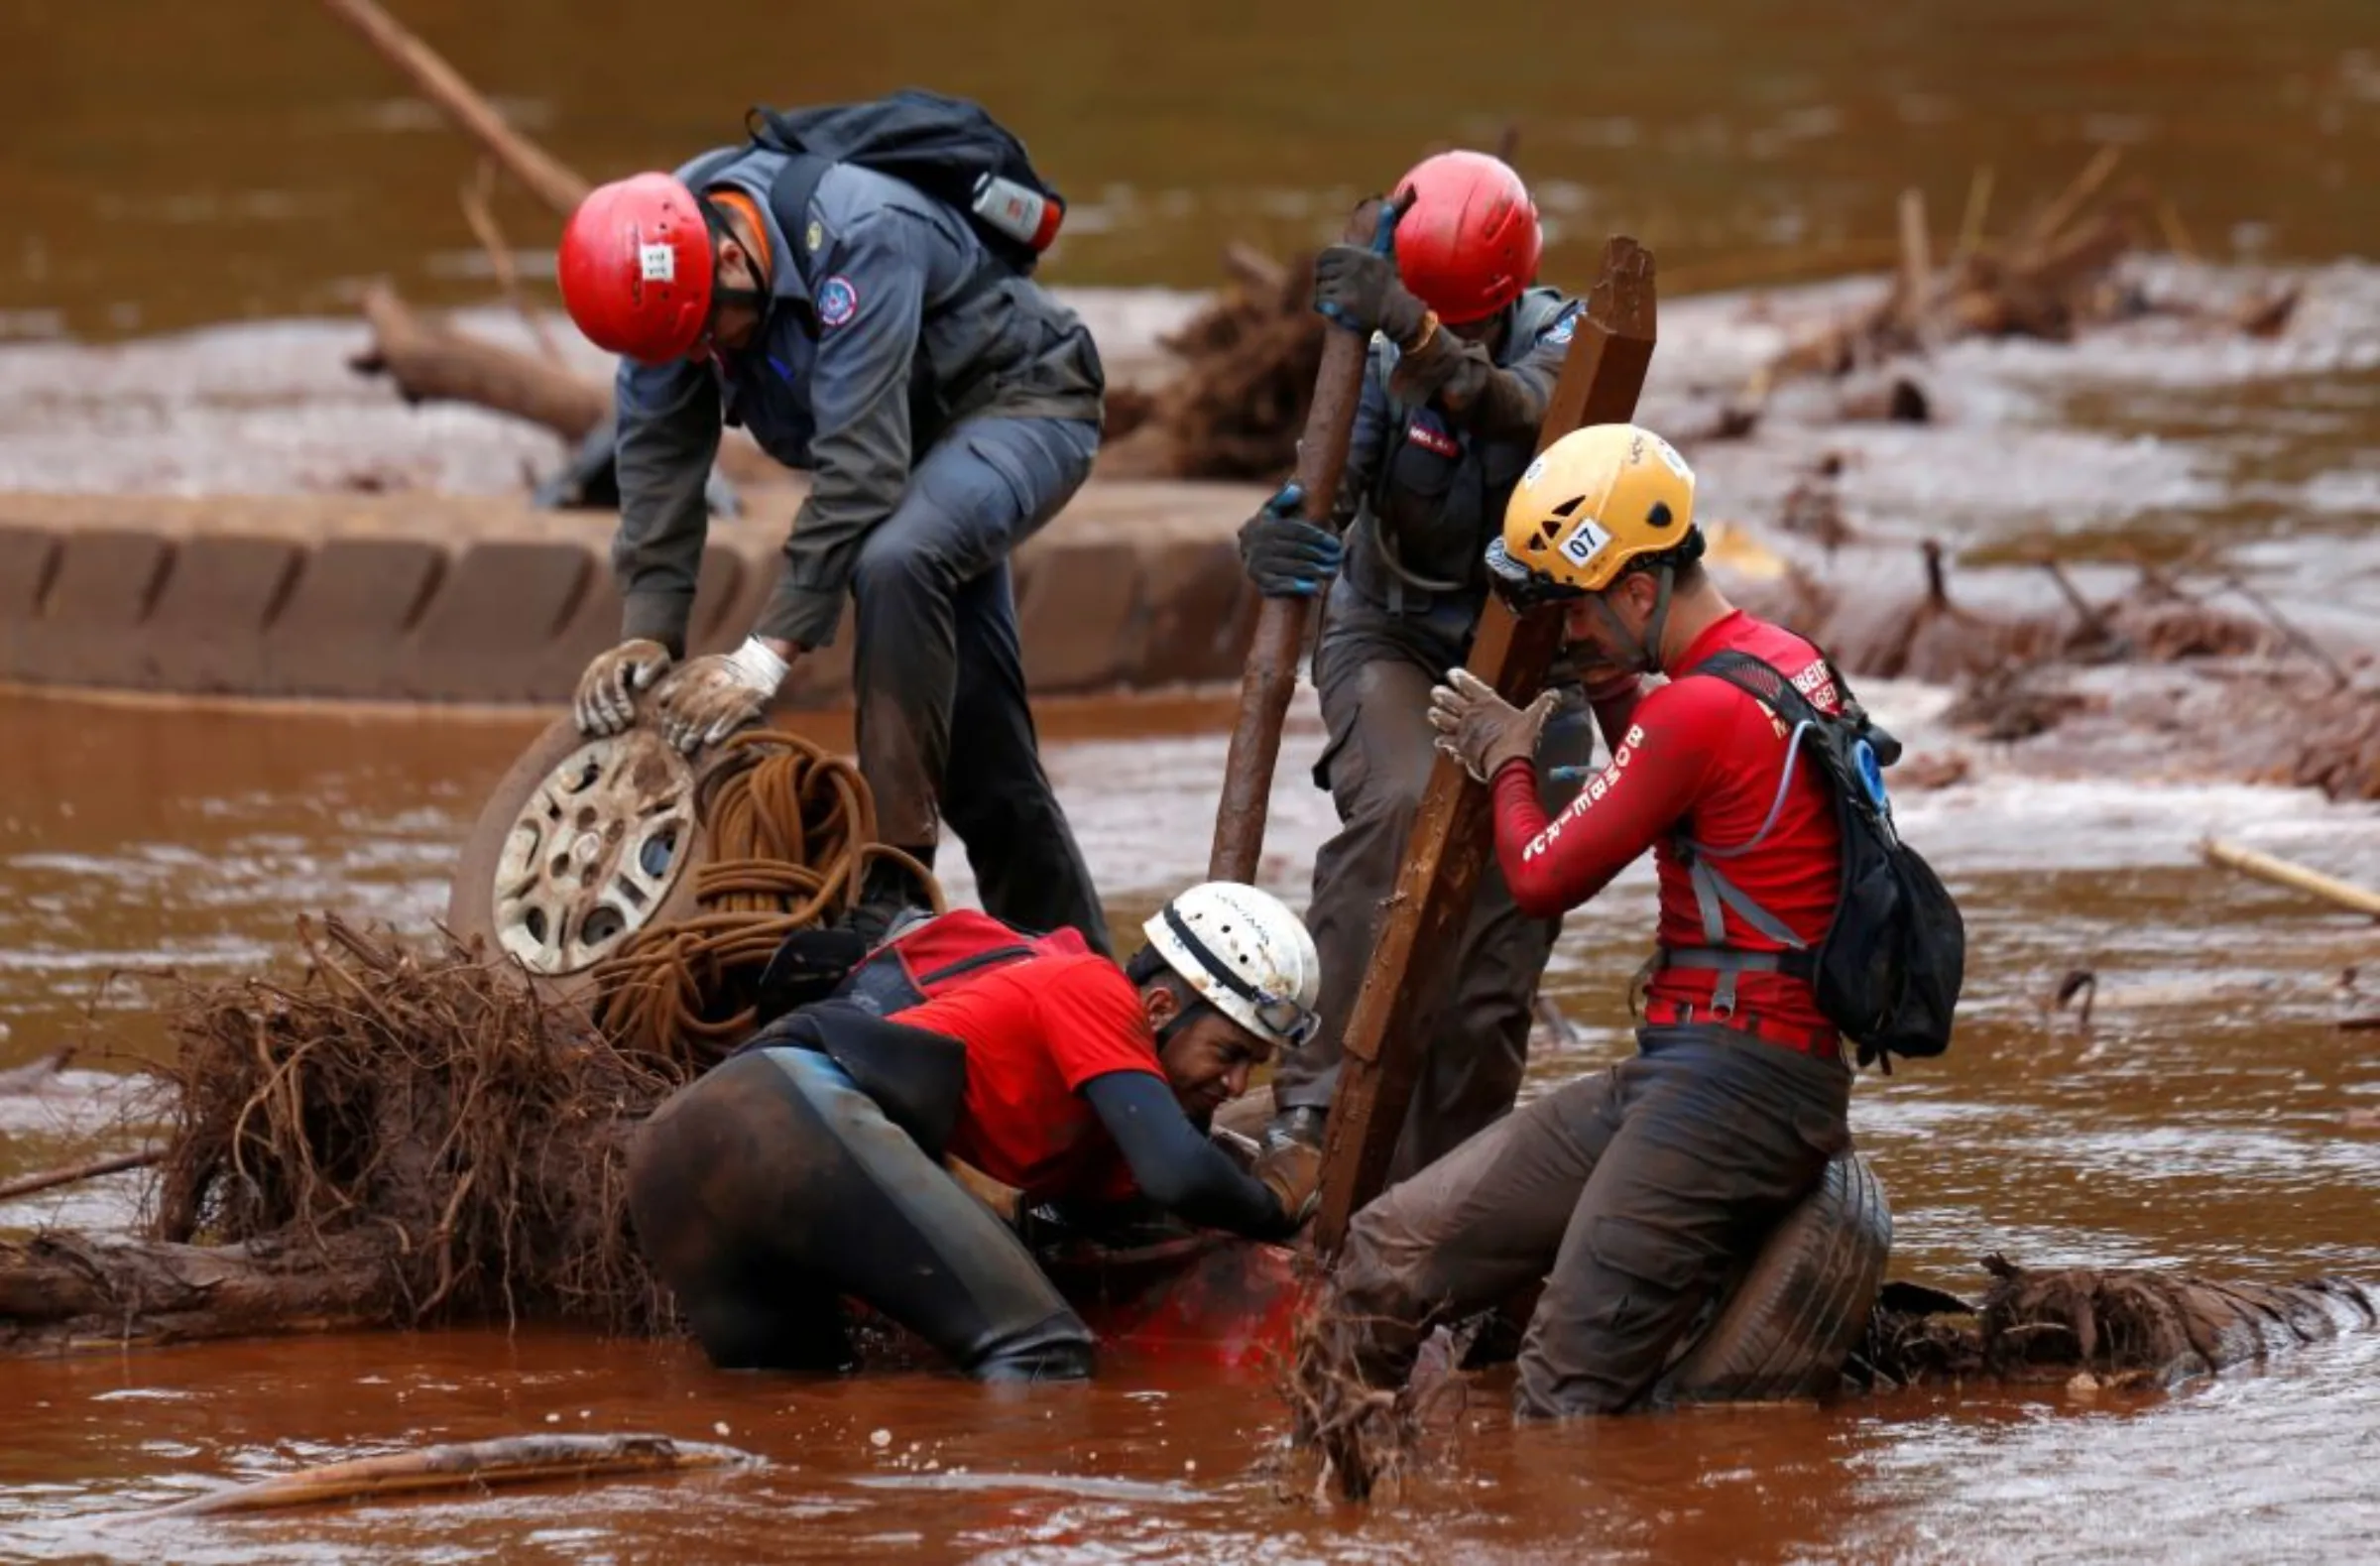 Members of a rescue team search for victims of a collapsed tailings dam owned by Brazilian mining company Vale SA in a vehicle on Paraopeba River, in Brumadinho, Brazil February 5, 2019. REUTERS/Adriano Machado